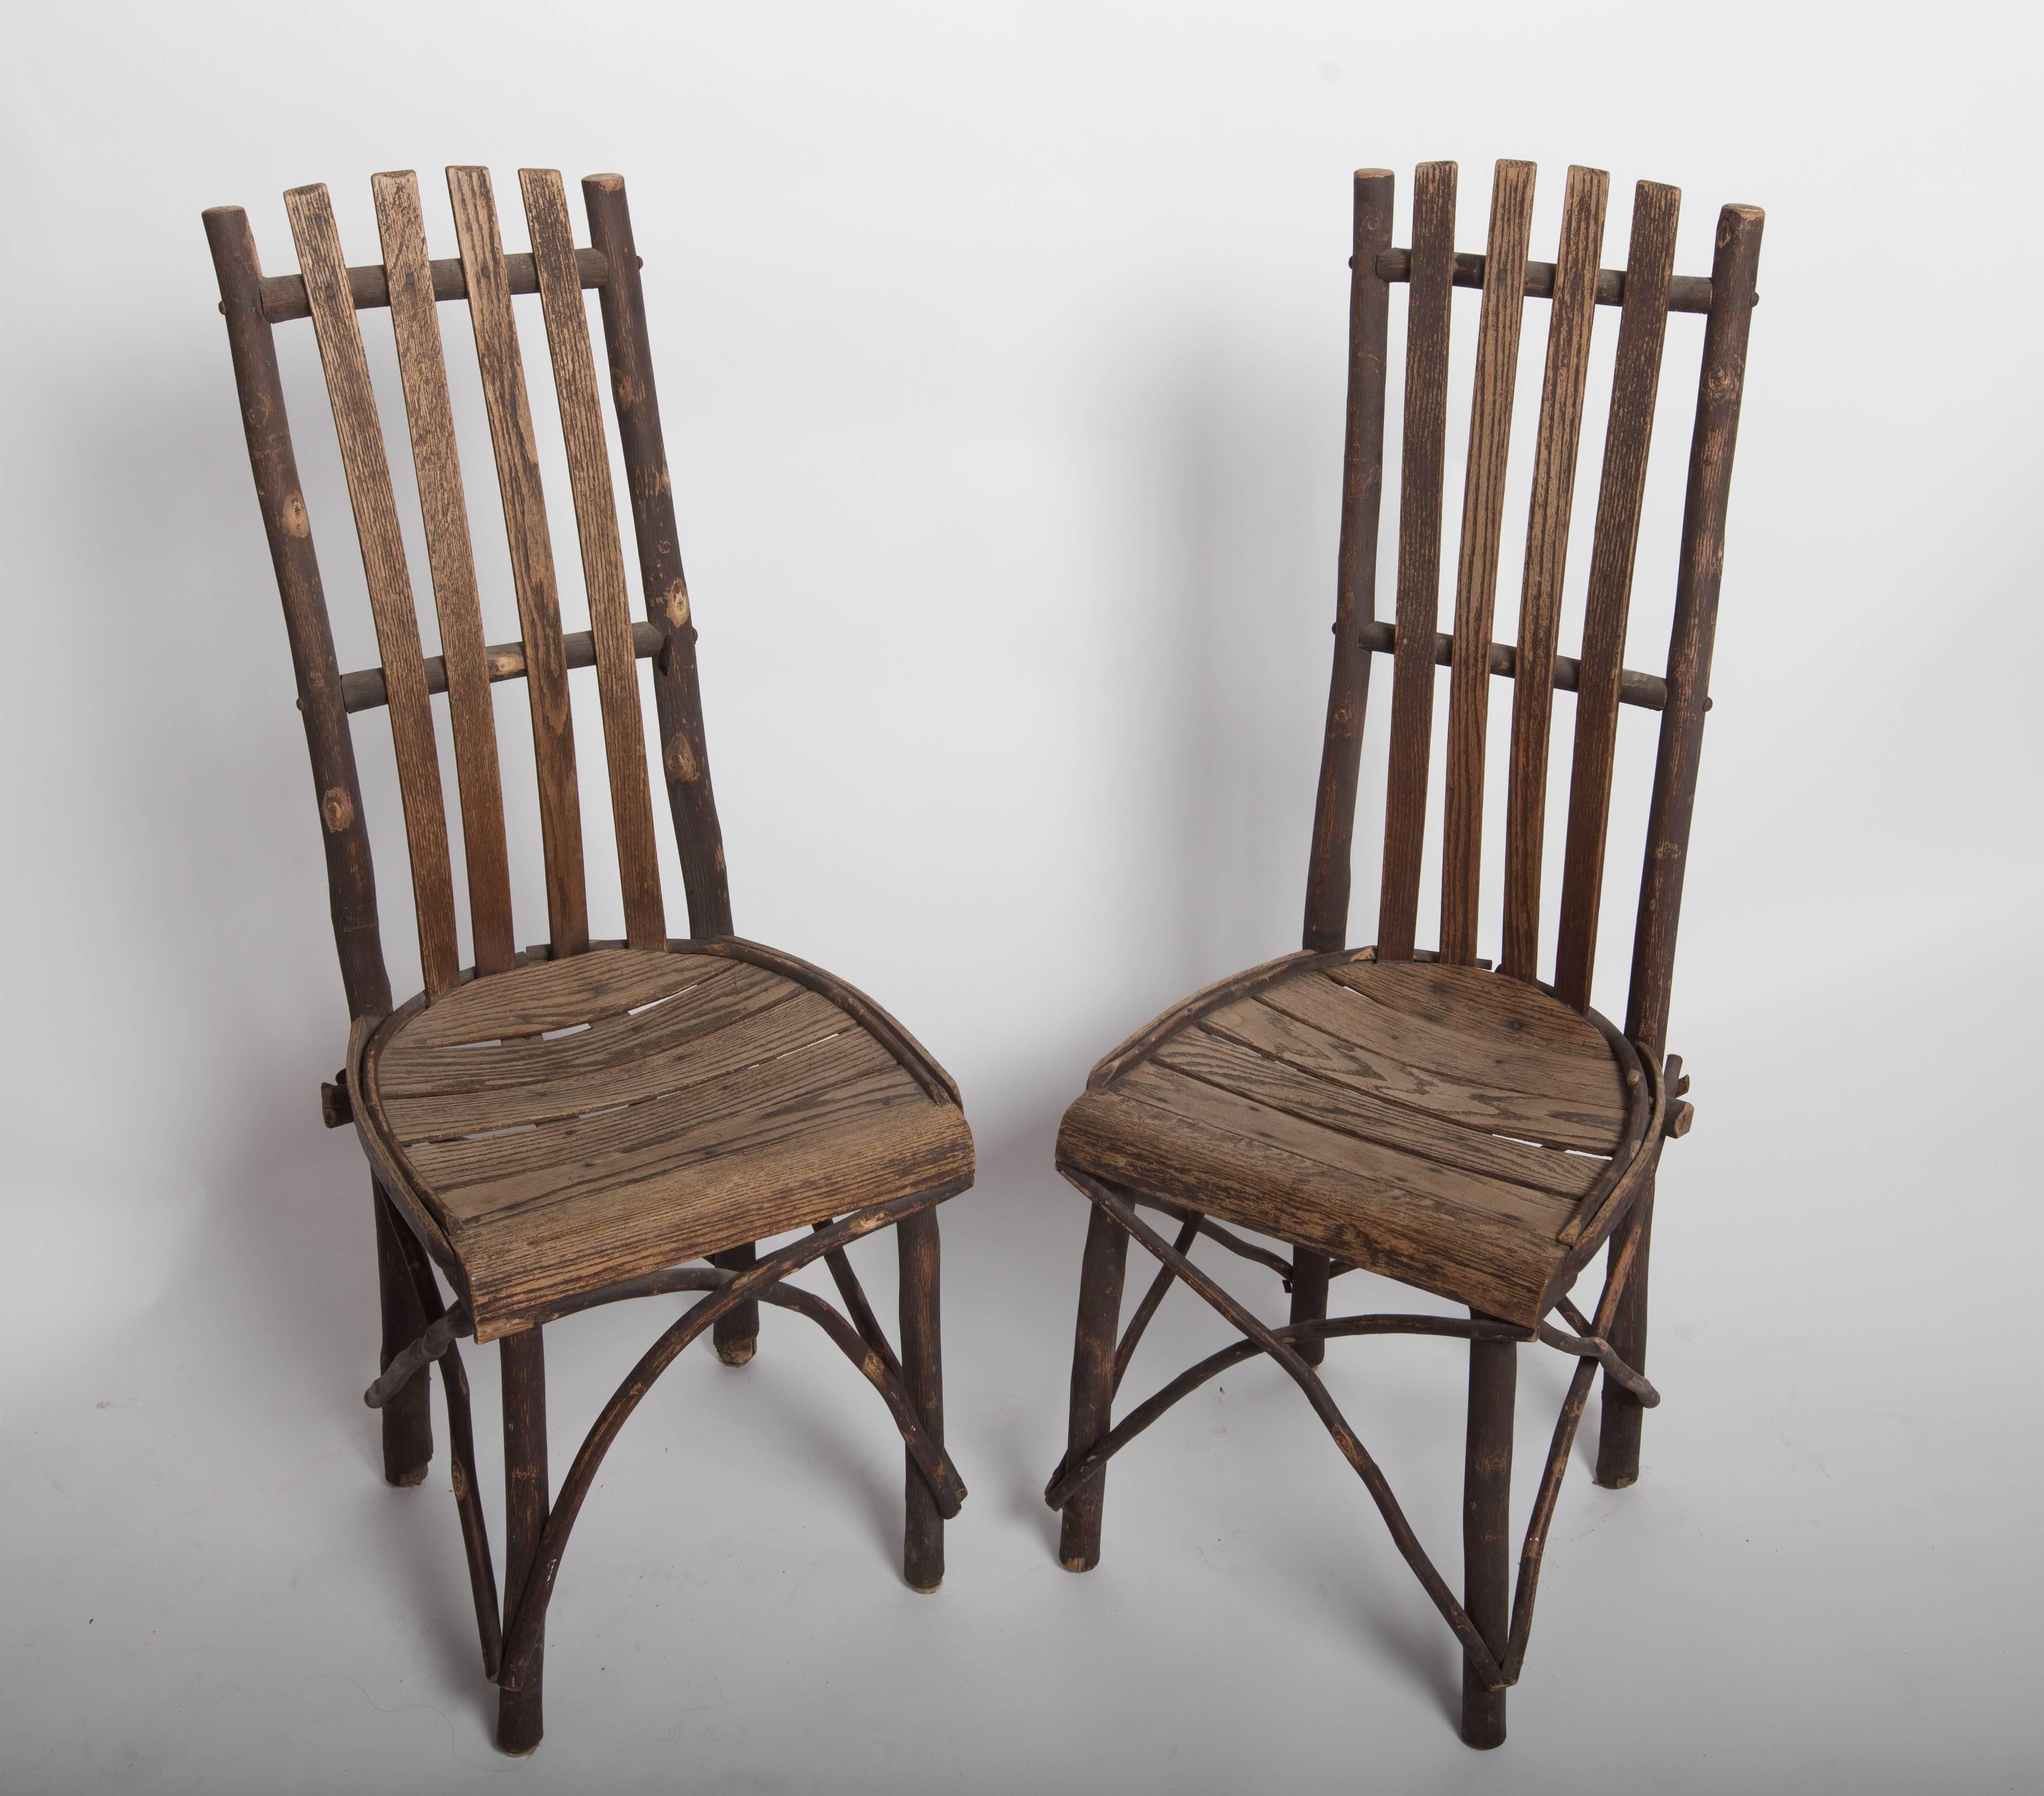 Antique Adirondack Old Hickory Table and Chairs In Excellent Condition For Sale In New York City, NY